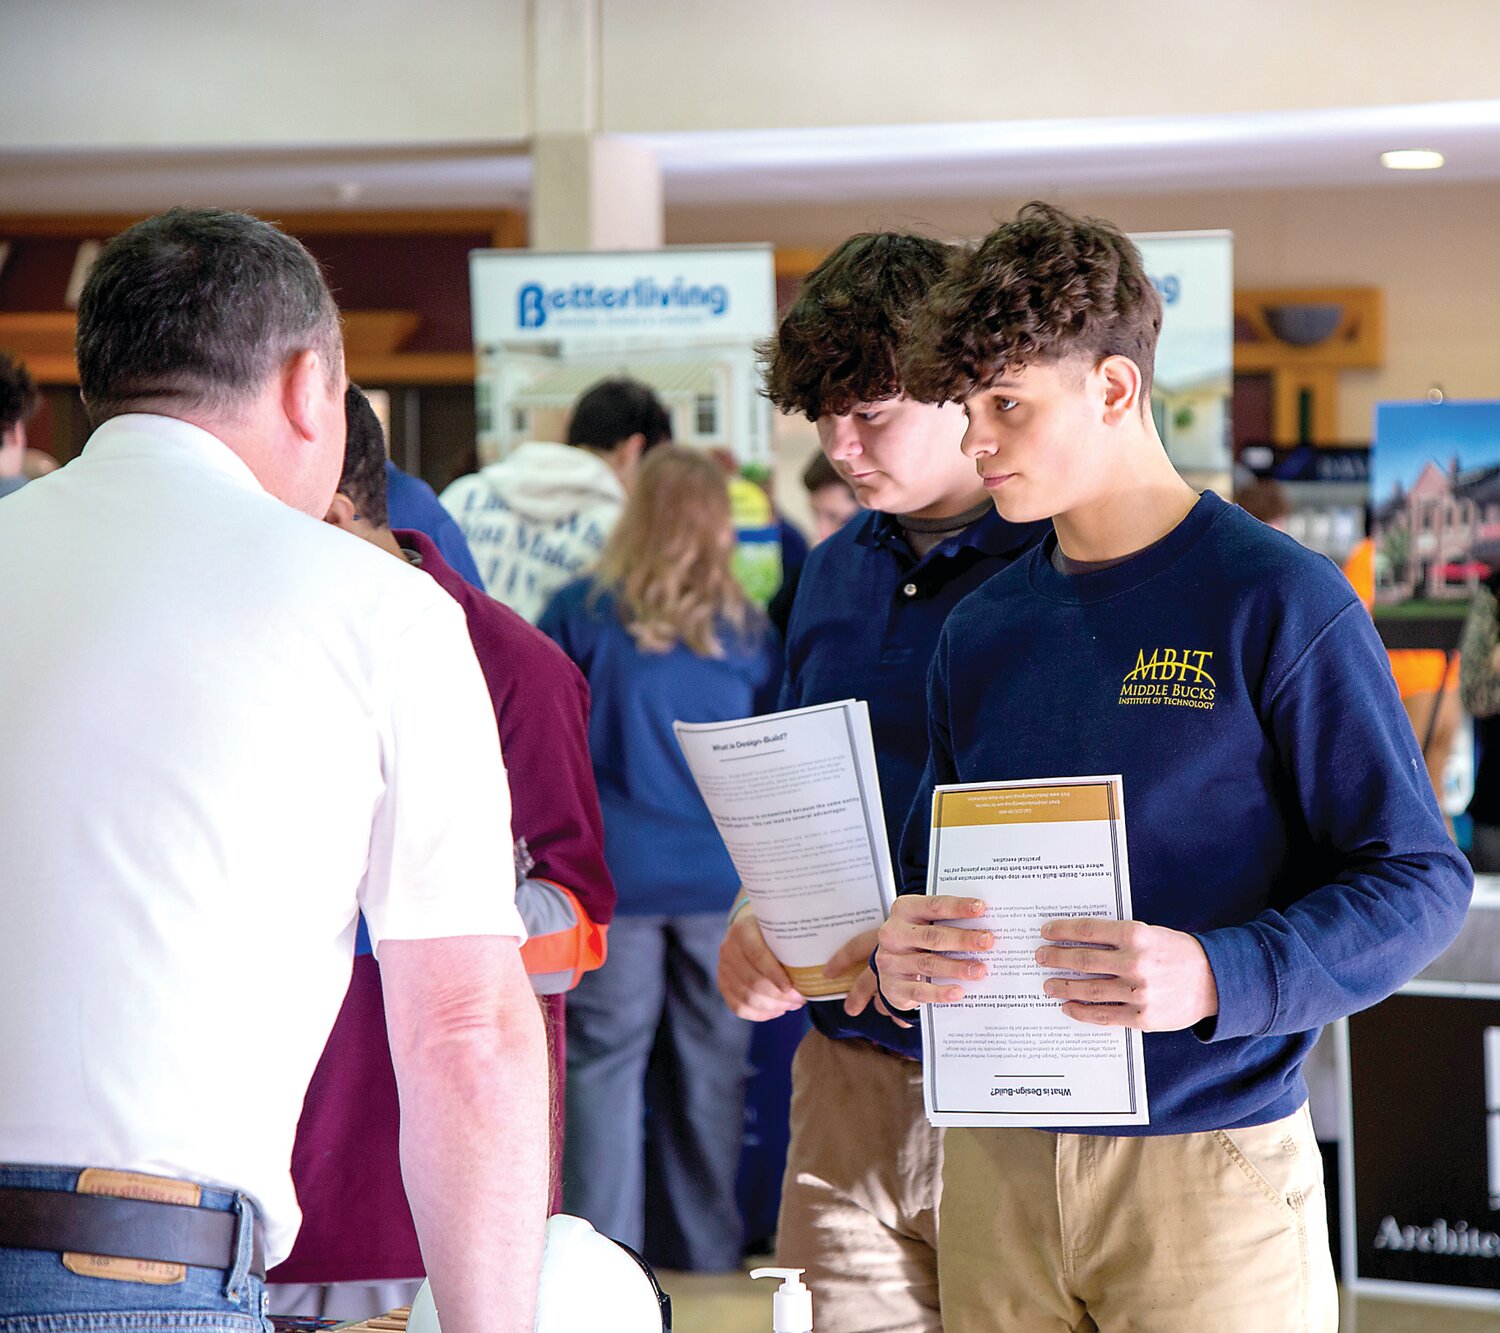 At the career fair, Middle Bucks Institute of Technology students had the opportunity to speak with employers and present their resumes and career goals.